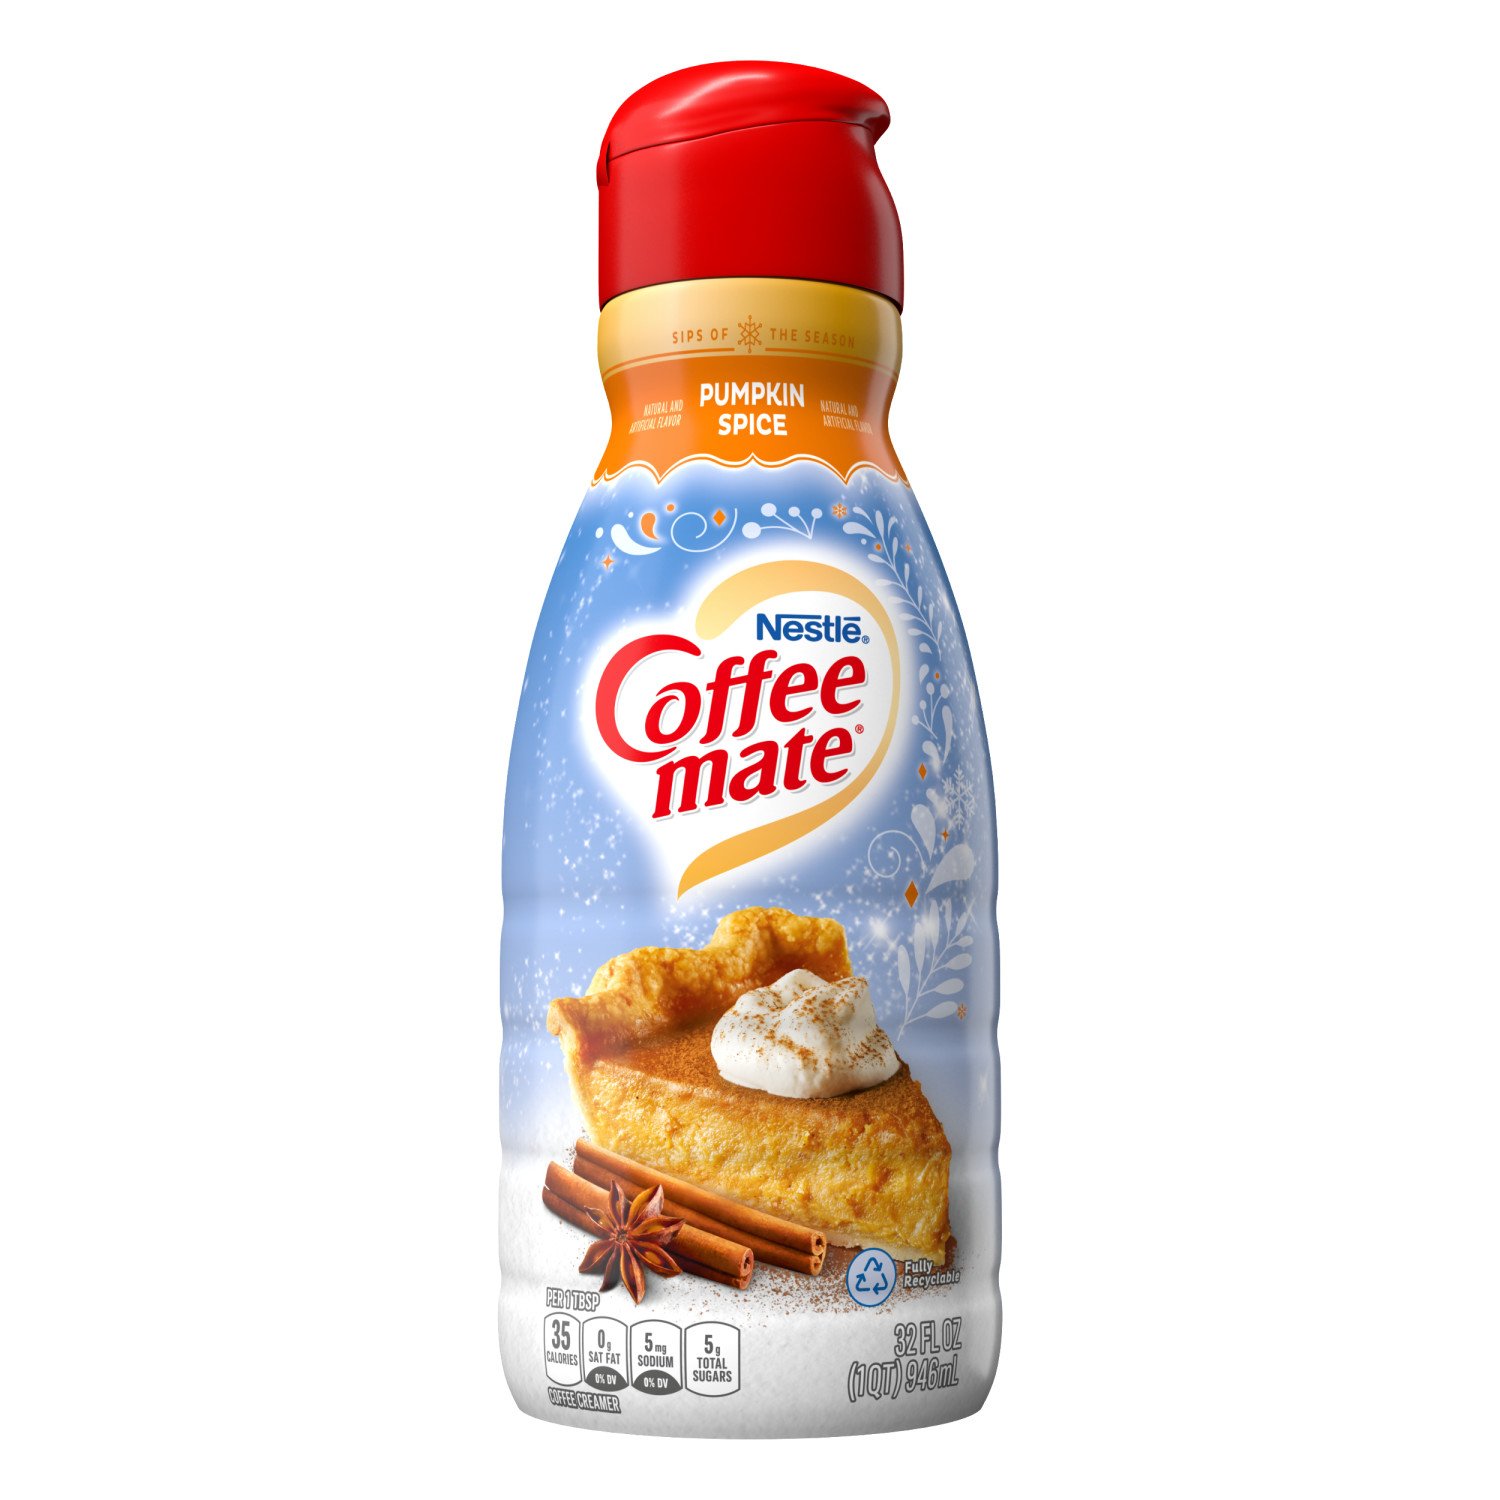 Recycled Creamer Bottles as Pourable Snack Containers